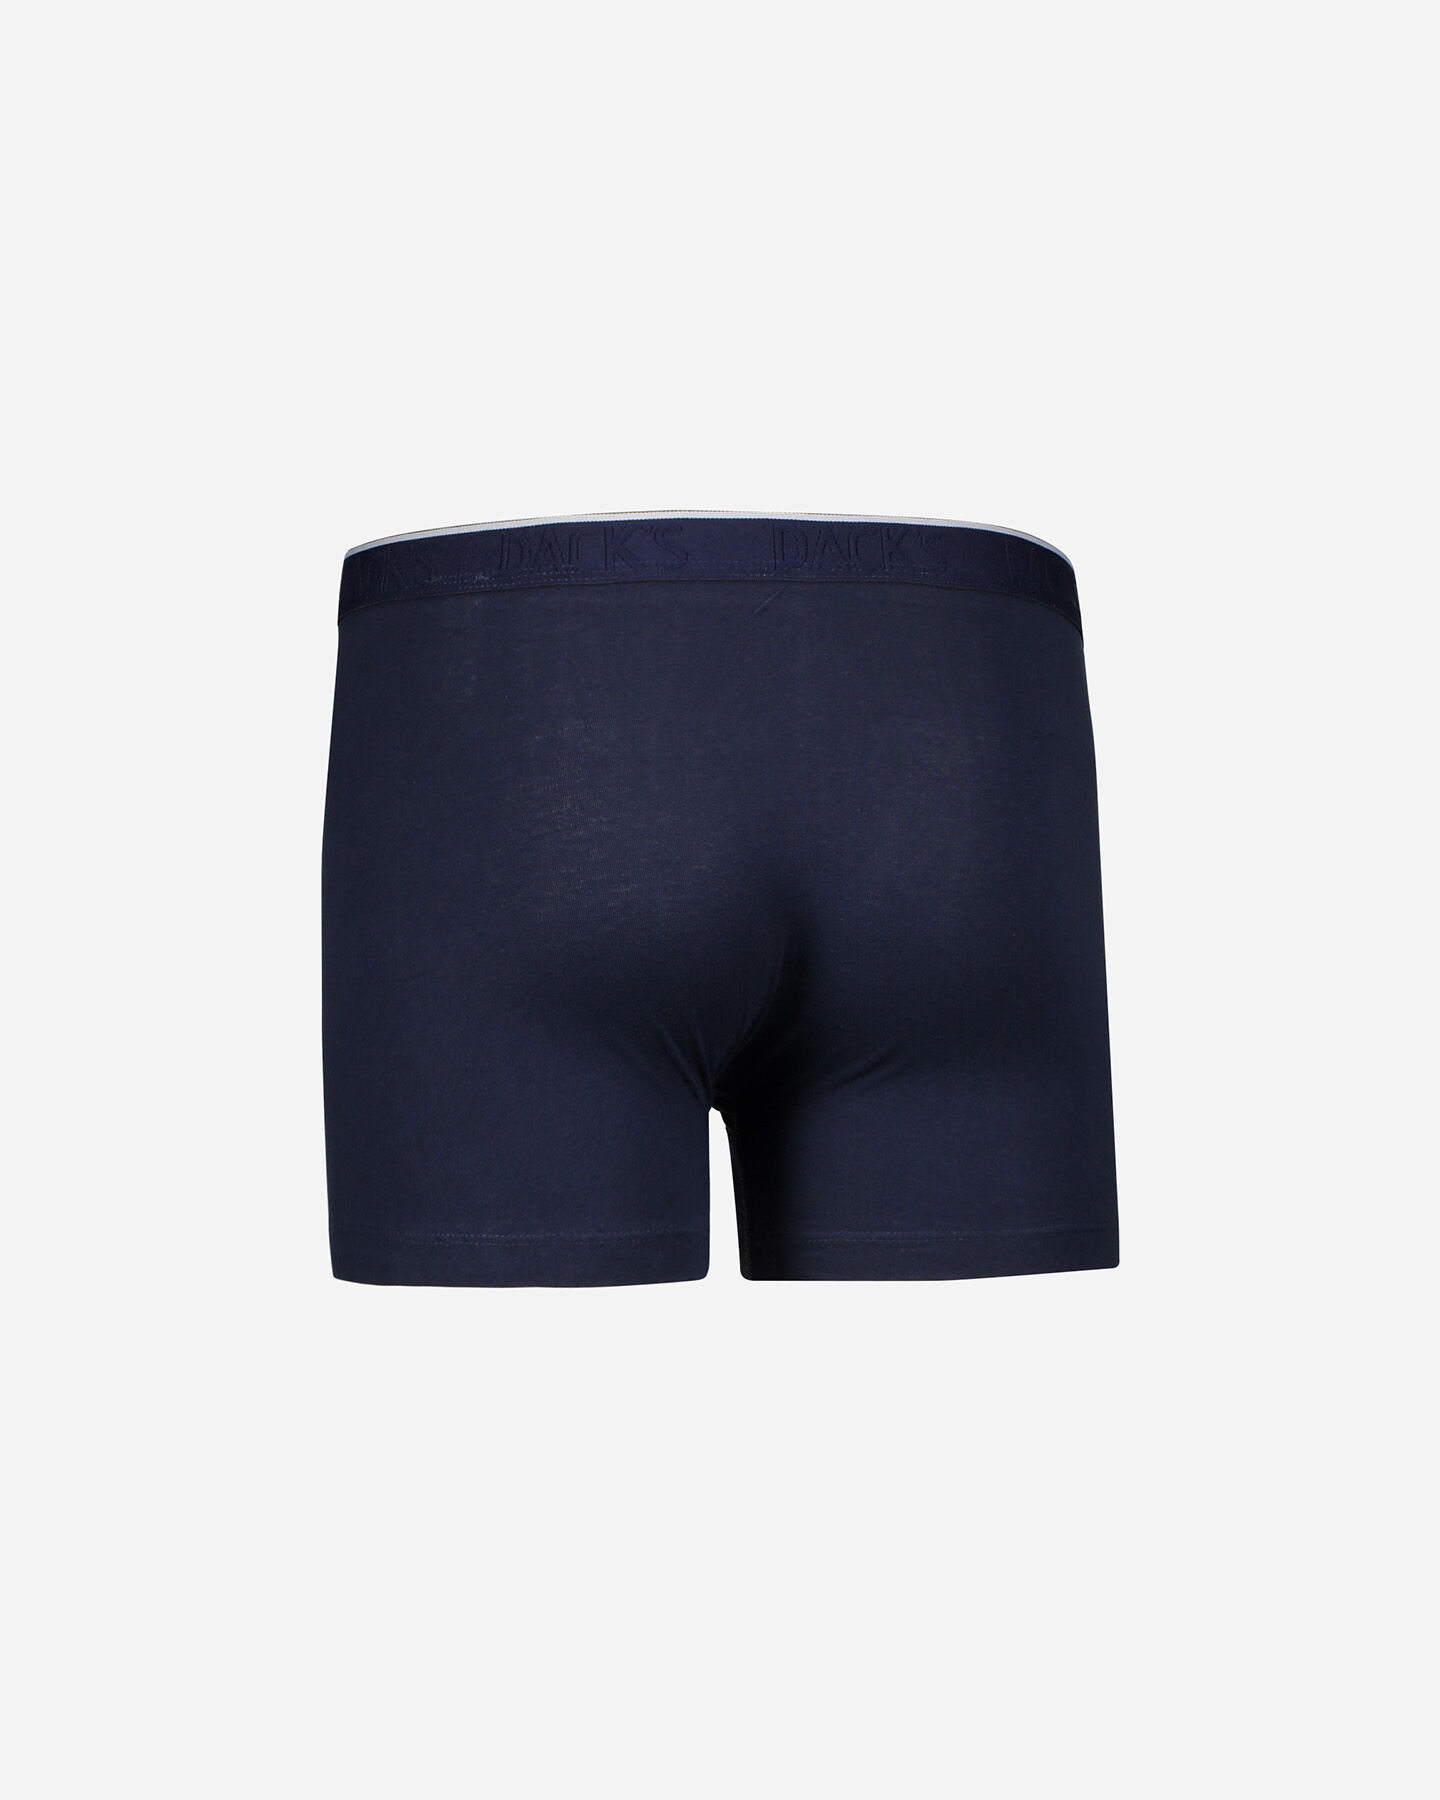  Intimo DACK'S BIPACK BASIC BOXER M S4061965|519/GM01|S scatto 4